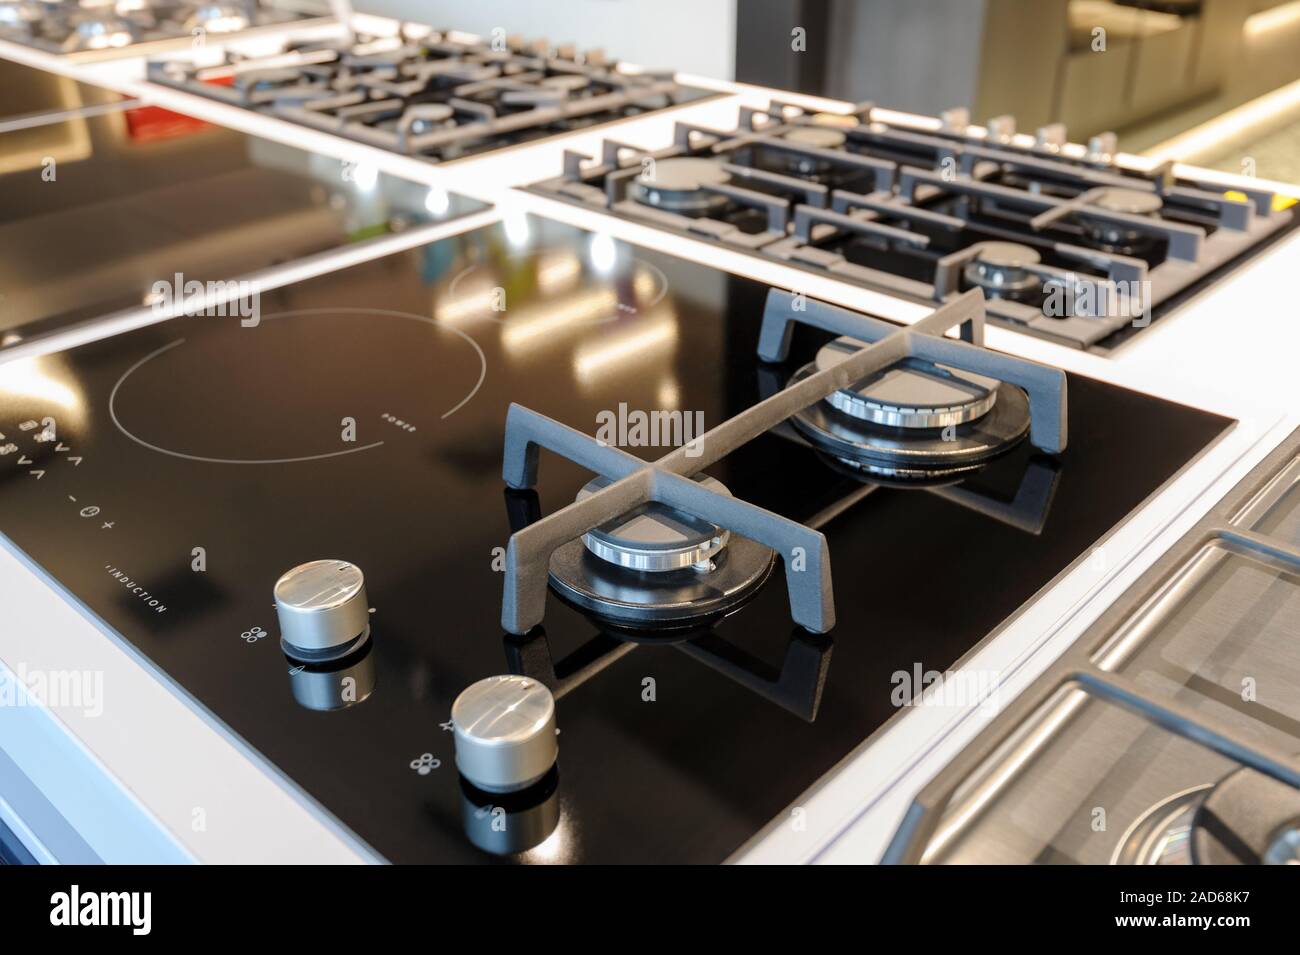 Brand new hybrid gas and electric induction stove Stock Photo